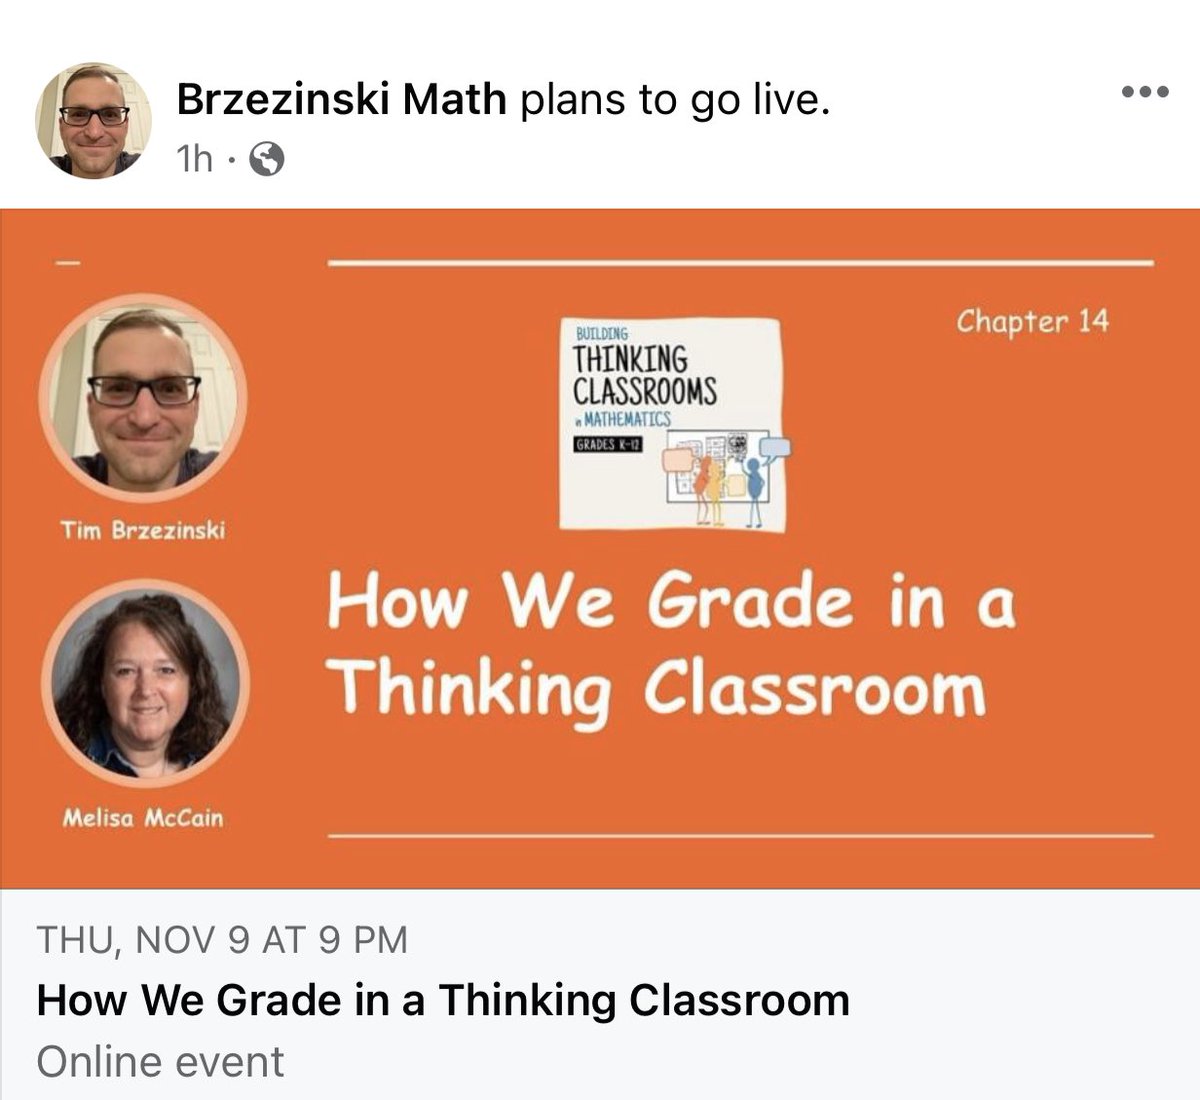 Cordial invite to join @mccainm and me live this coming Thursday night NOV 9 from 9P - 10P Eastern! Open to all teachers. No pre-registration required. 👇 Live URL: youtube.com/live/Fgturm1No… @pgliljedahl @thinkingclssrms #MTBoS #ITeachMath